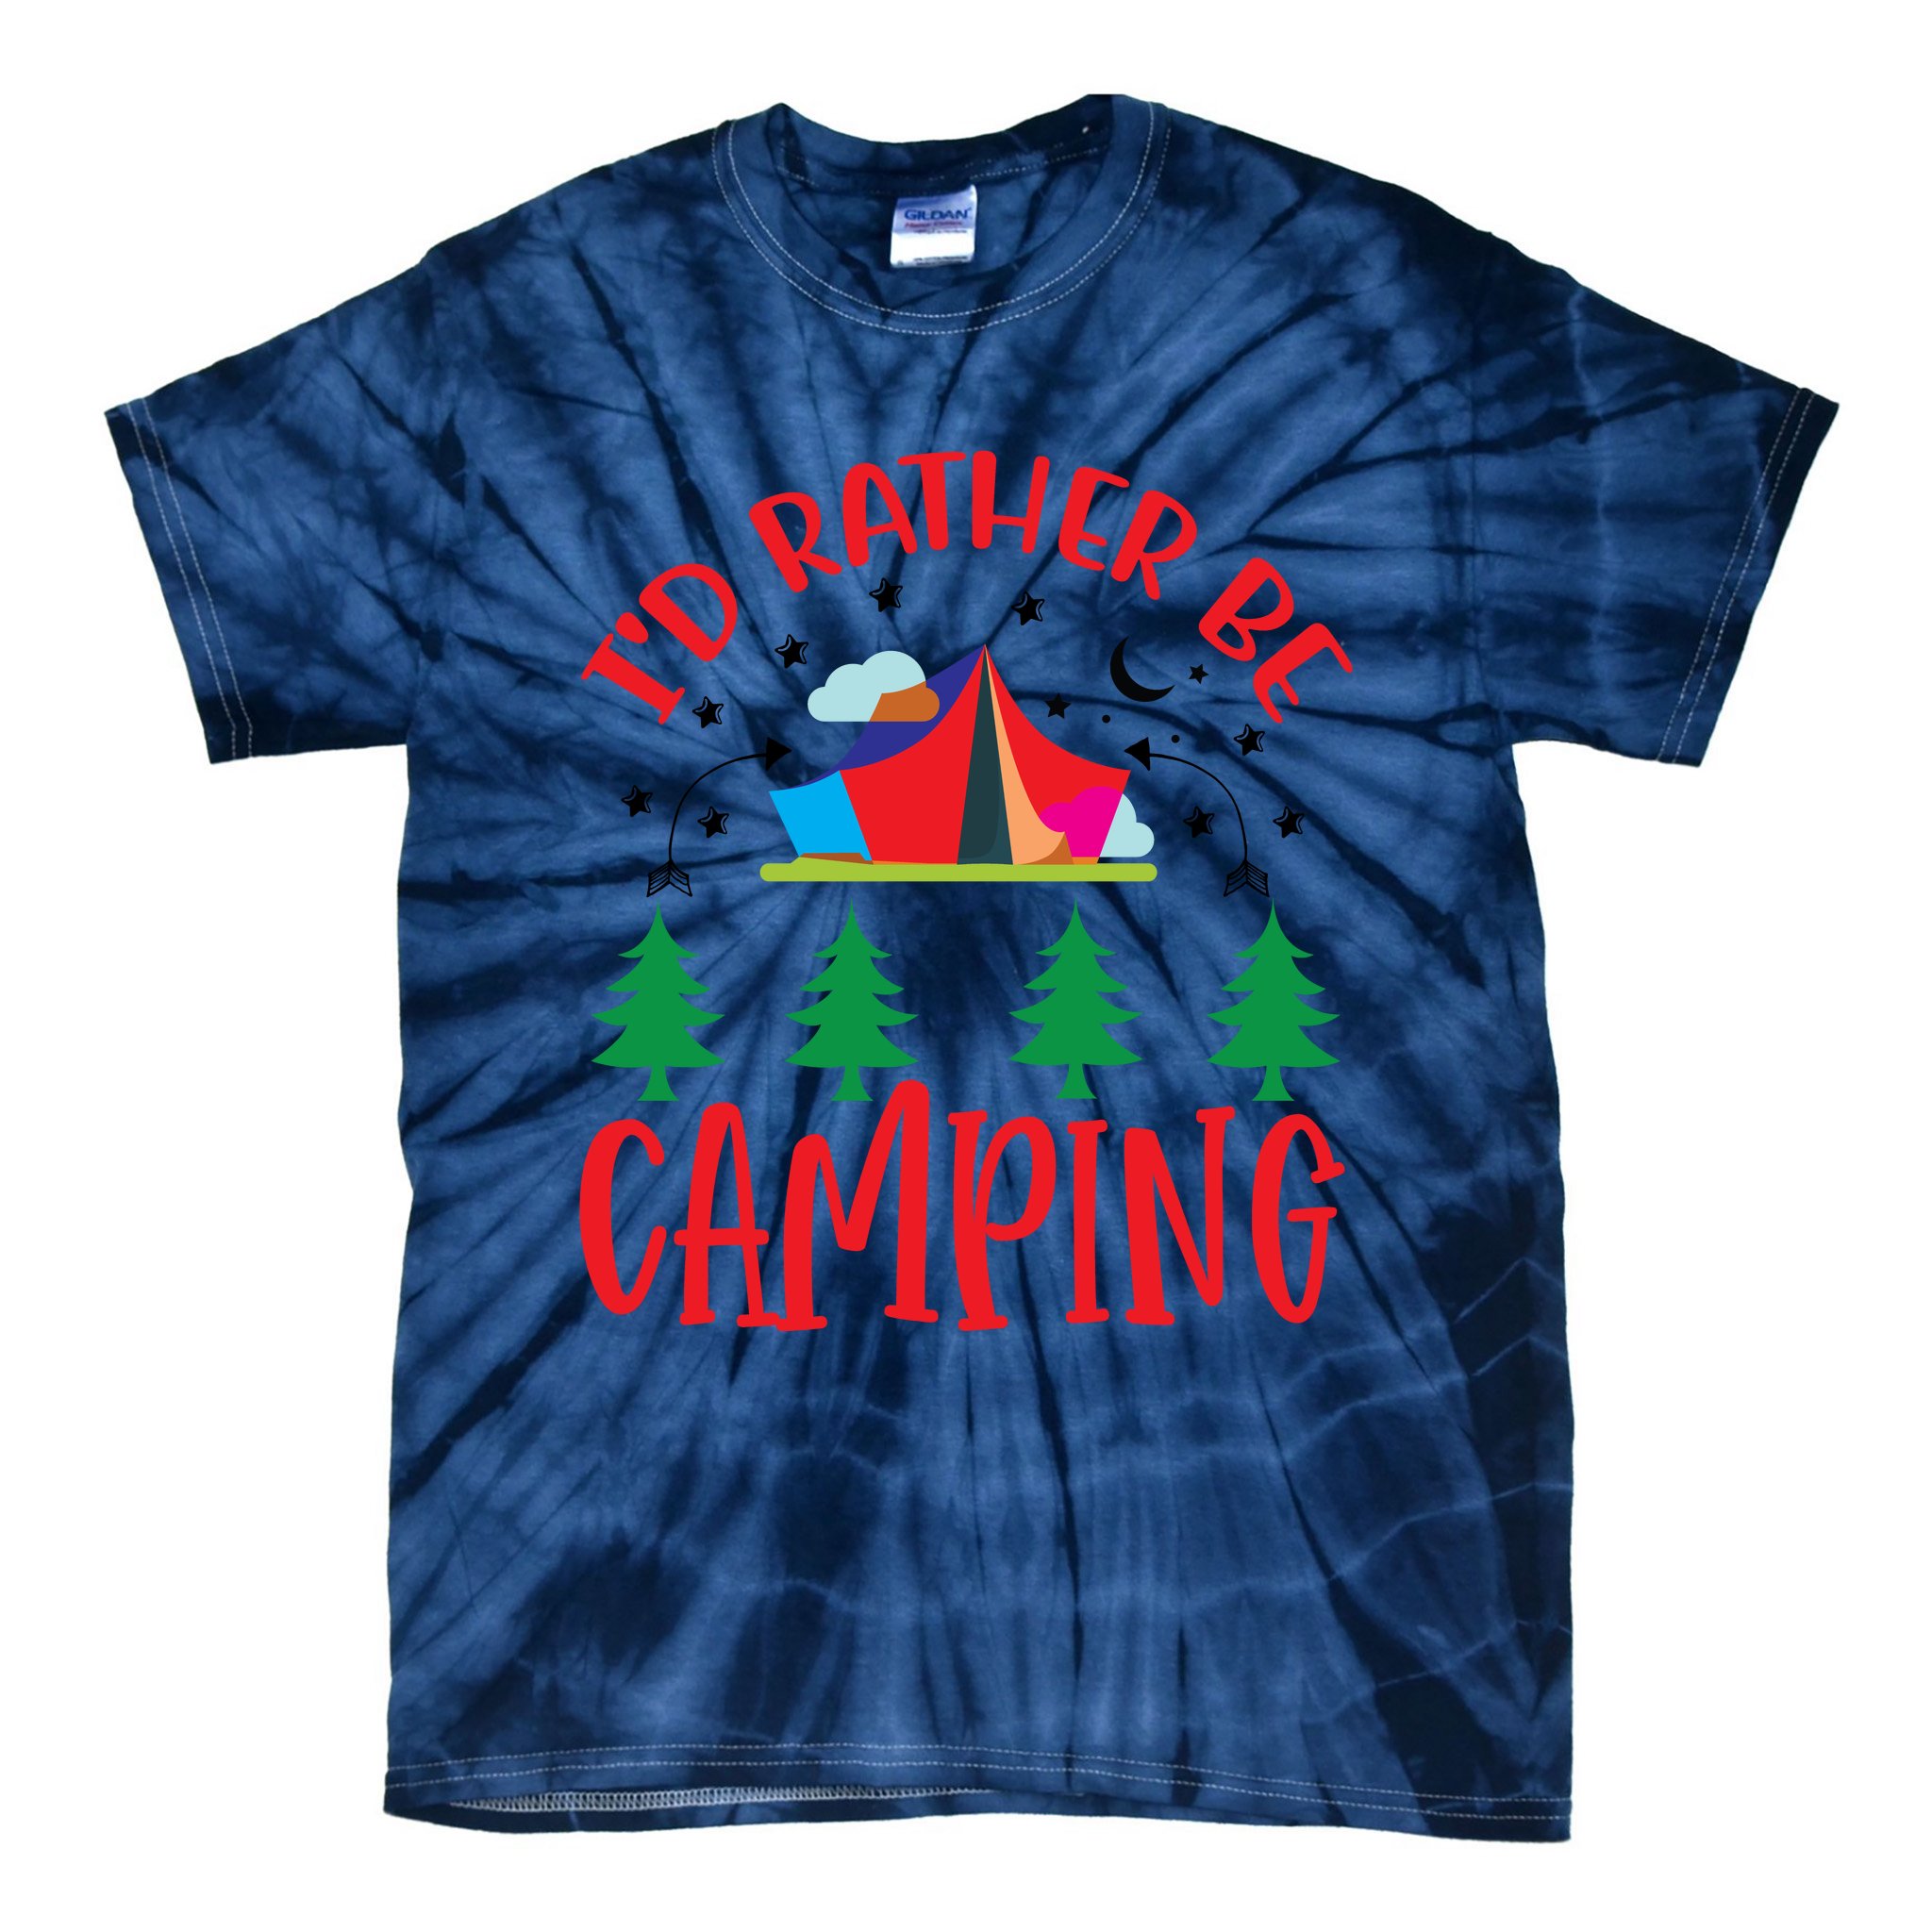 https://images3.teeshirtpalace.com/images/productImages/irb5514758-id-rather-be-camping-funny-camping--navy-tds-garment.jpg